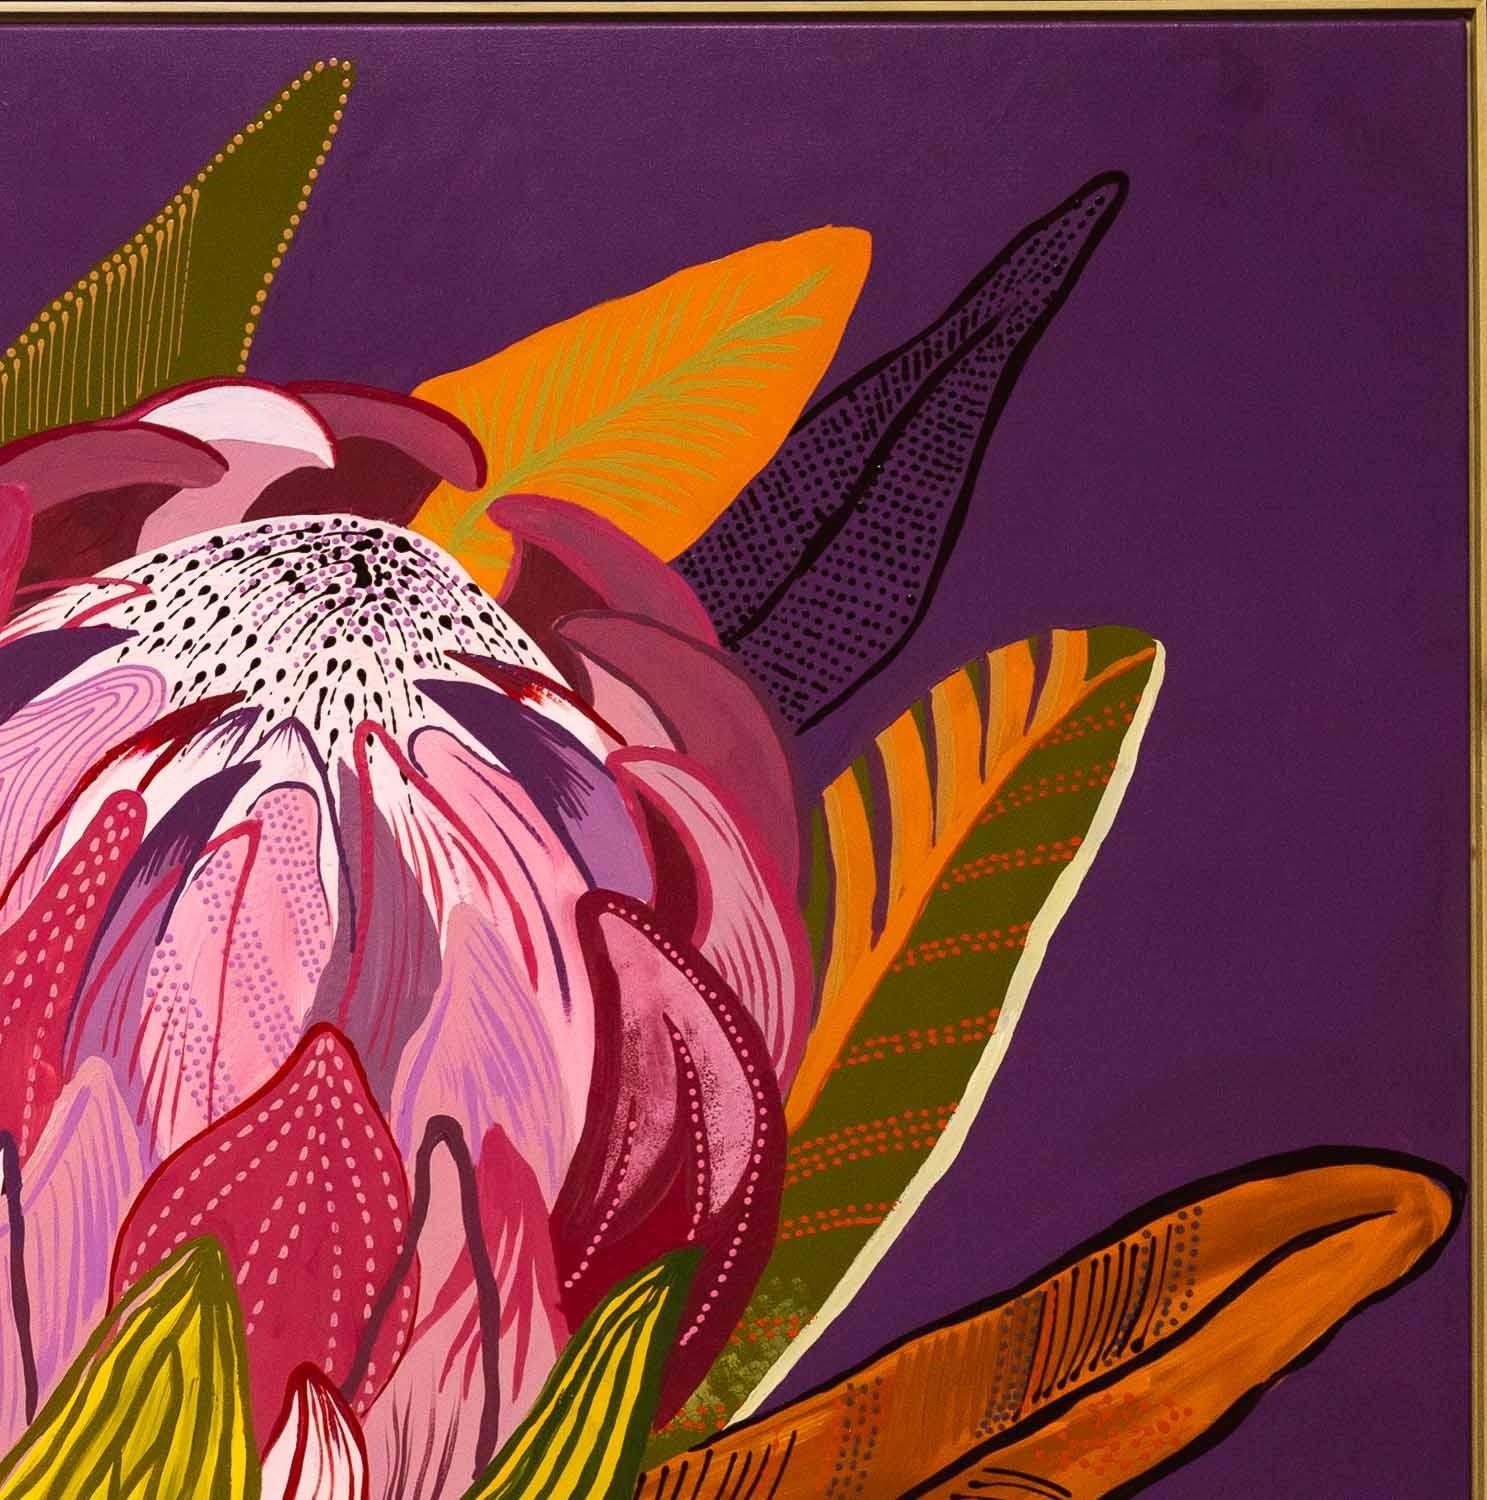 Artwork by Giada Pasquetto, Protea in Bloom, Made of Mixed media on canvas